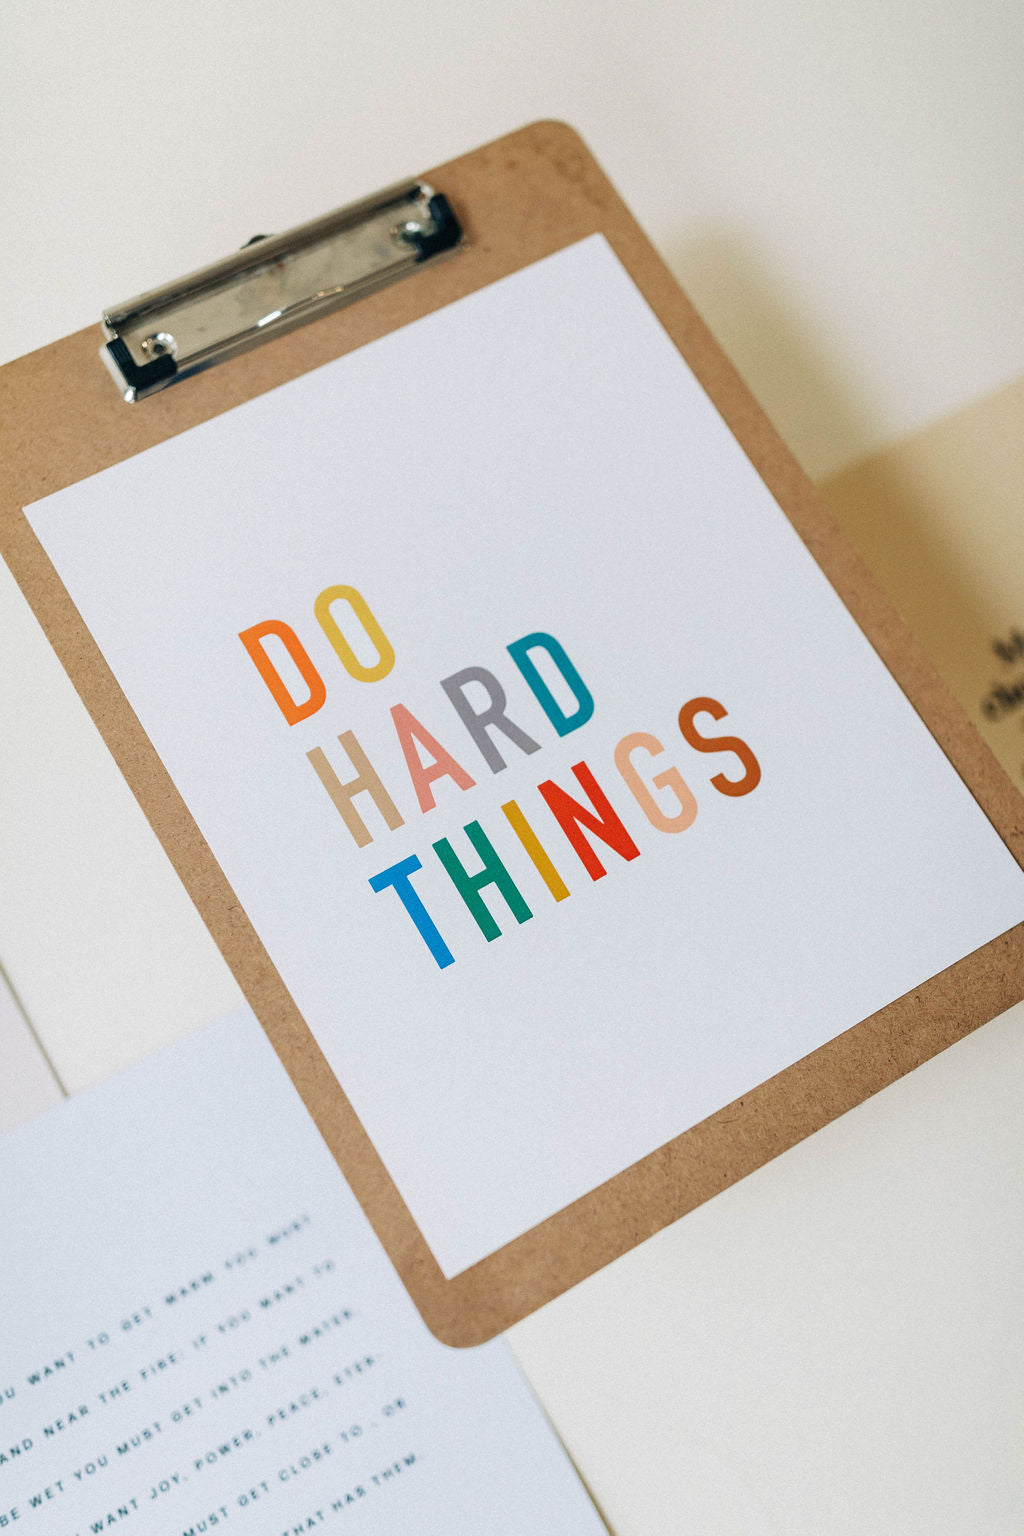 the design: do hard things. the size: 8x10 multi color print on card stock packed in a cello sleeve made in the USA ﻿*digital downloads will be delivered via email after purchase is complete.Ramble & Co. is a family owned business. Shop at shop.rambleandcompany.com or visit our store in Wichita Falls, Texas || small batch/ hand printed tees + fine art prints | your source of encouragement + inspiration.